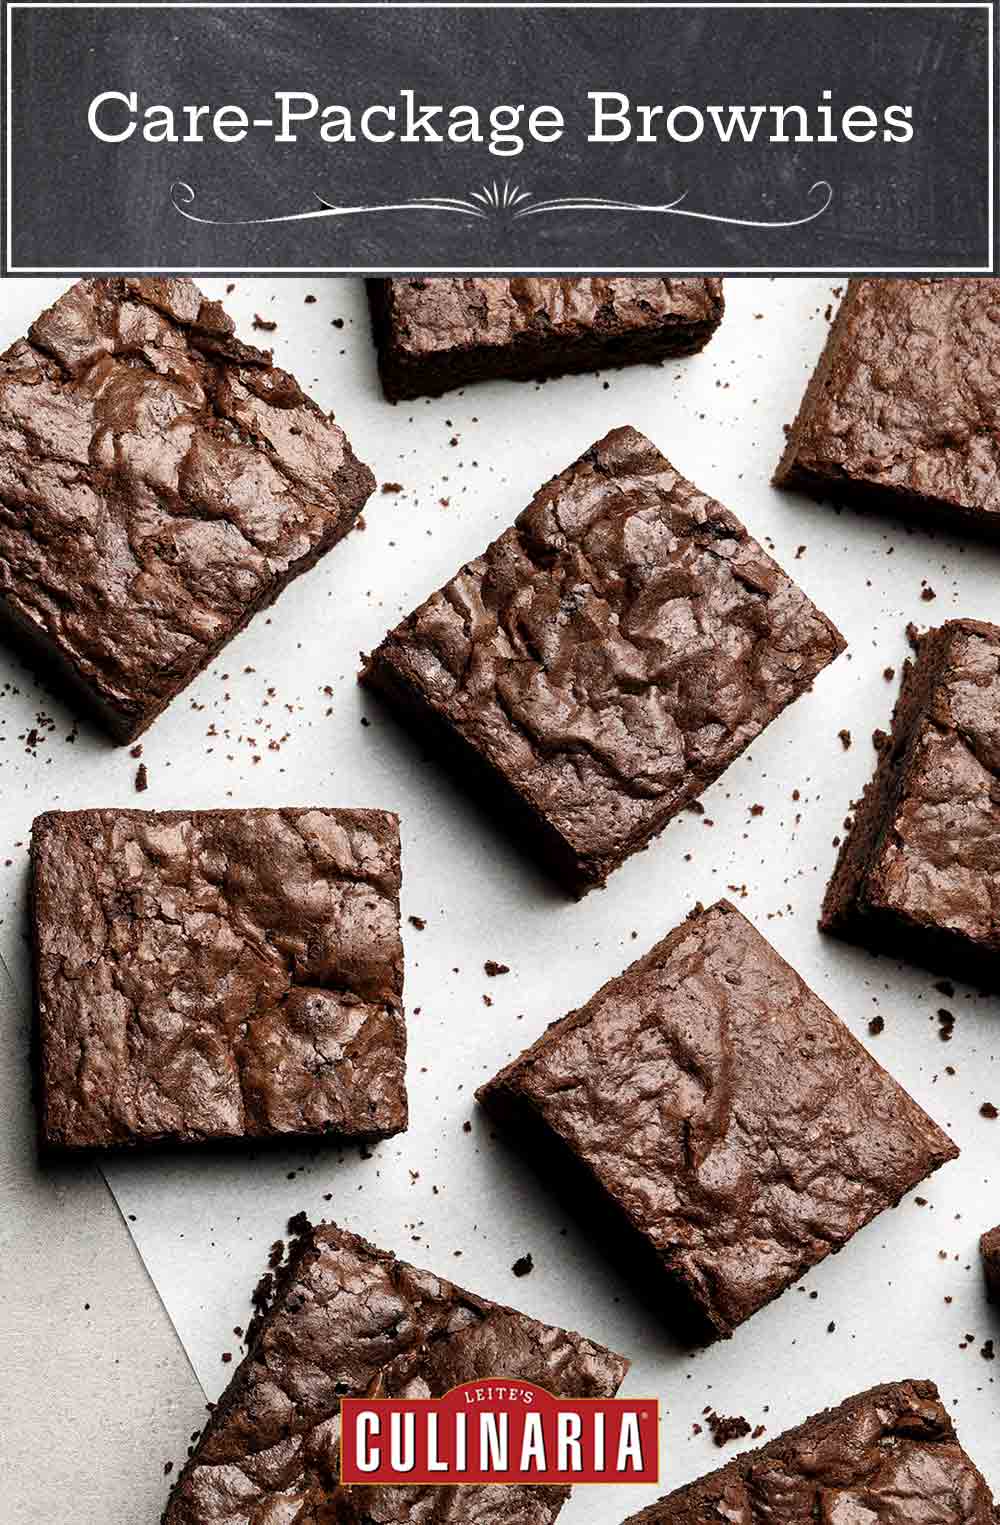 Squares of care-package brownies on parchment paper.